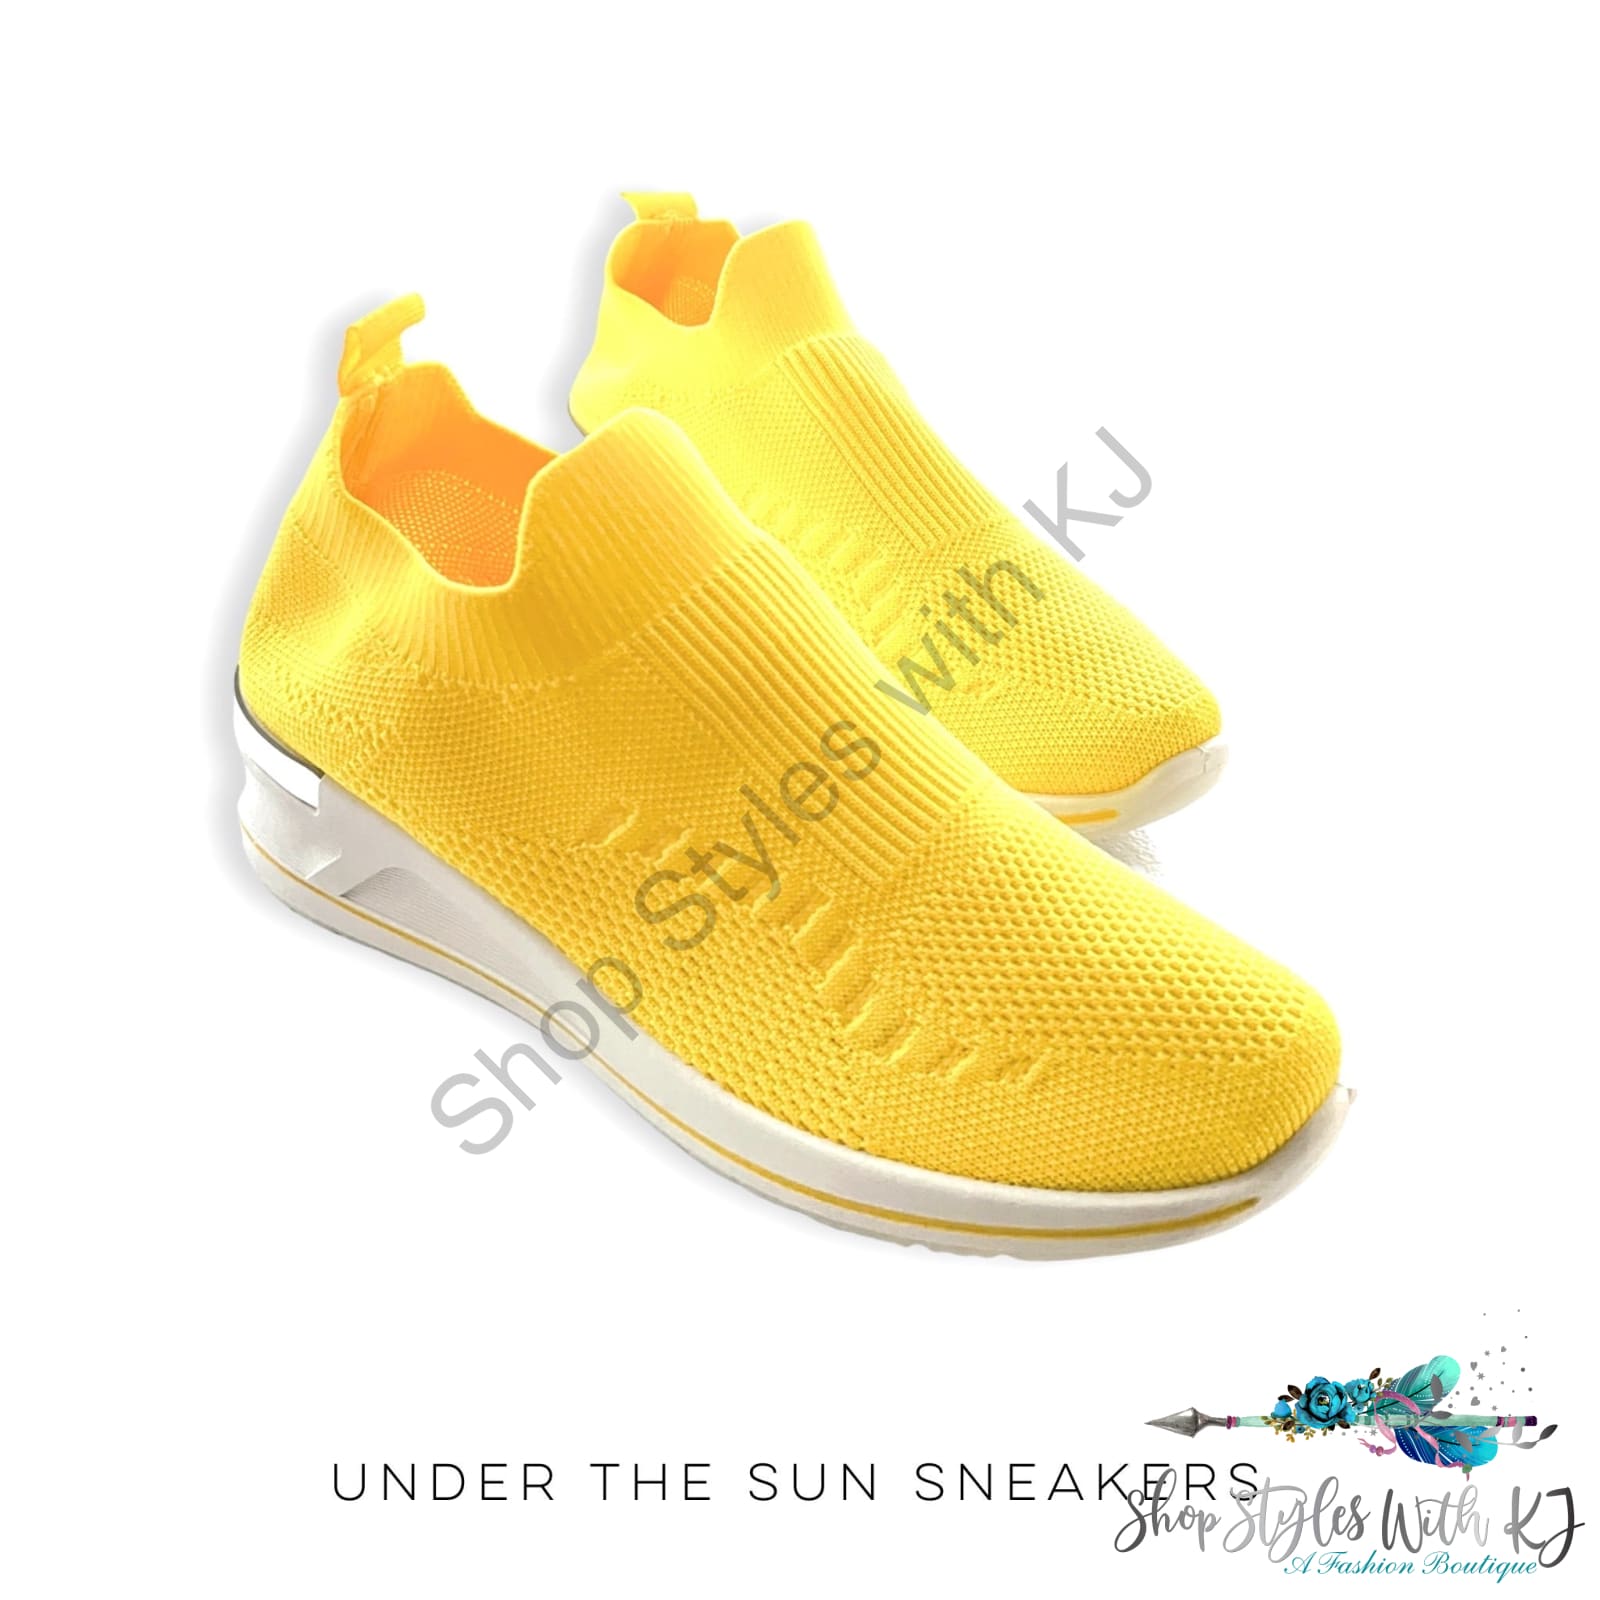 Under The Sun Sneakers Golden Road Trading